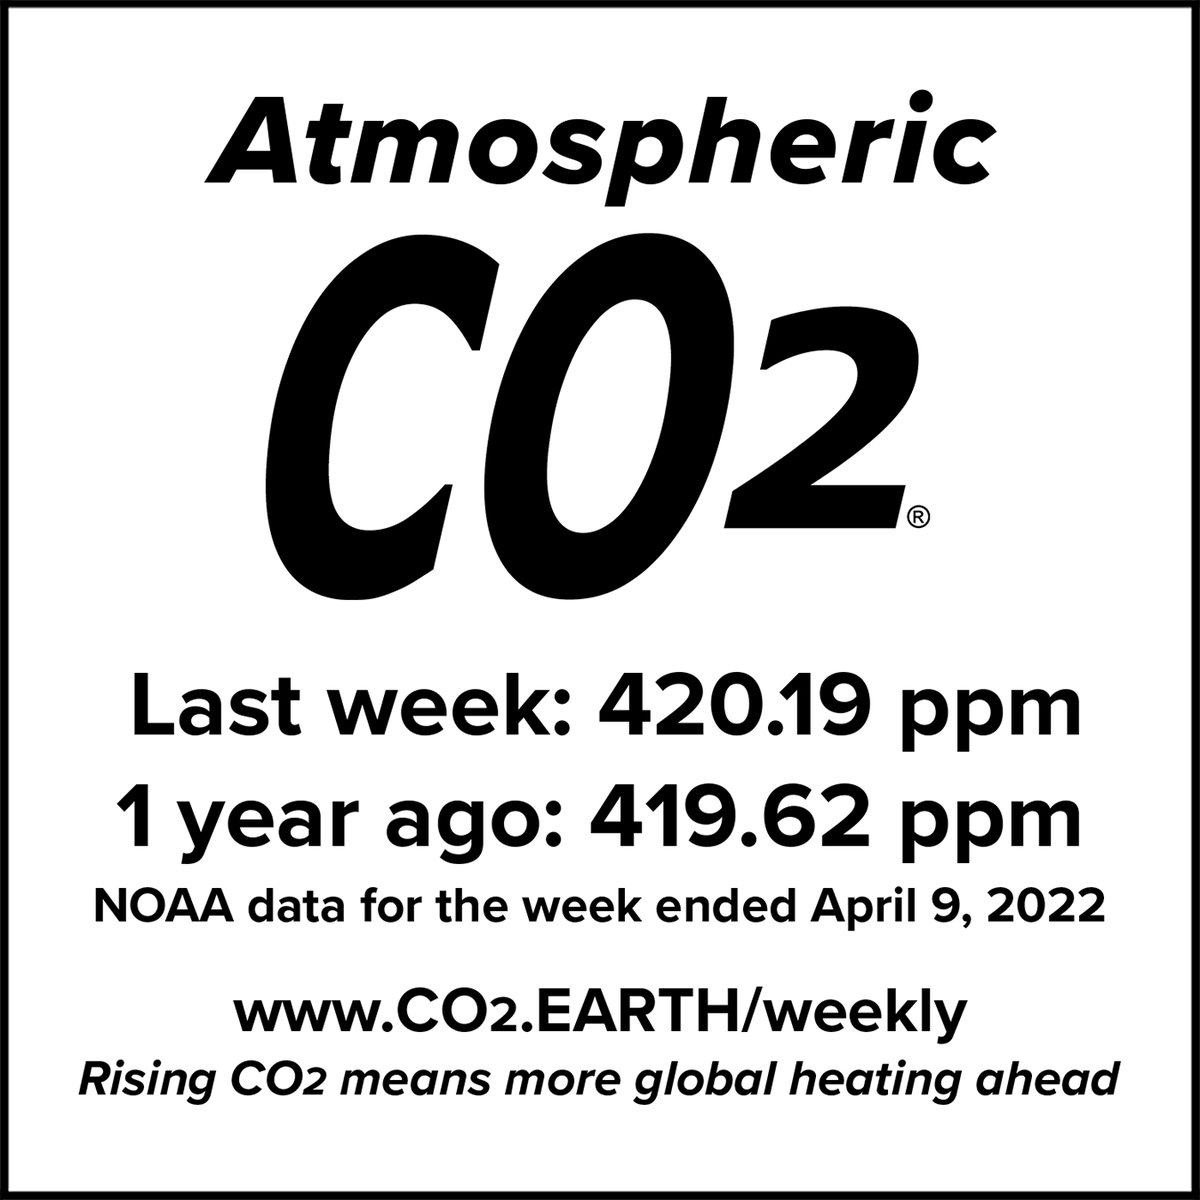 CO2_earth tweet picture